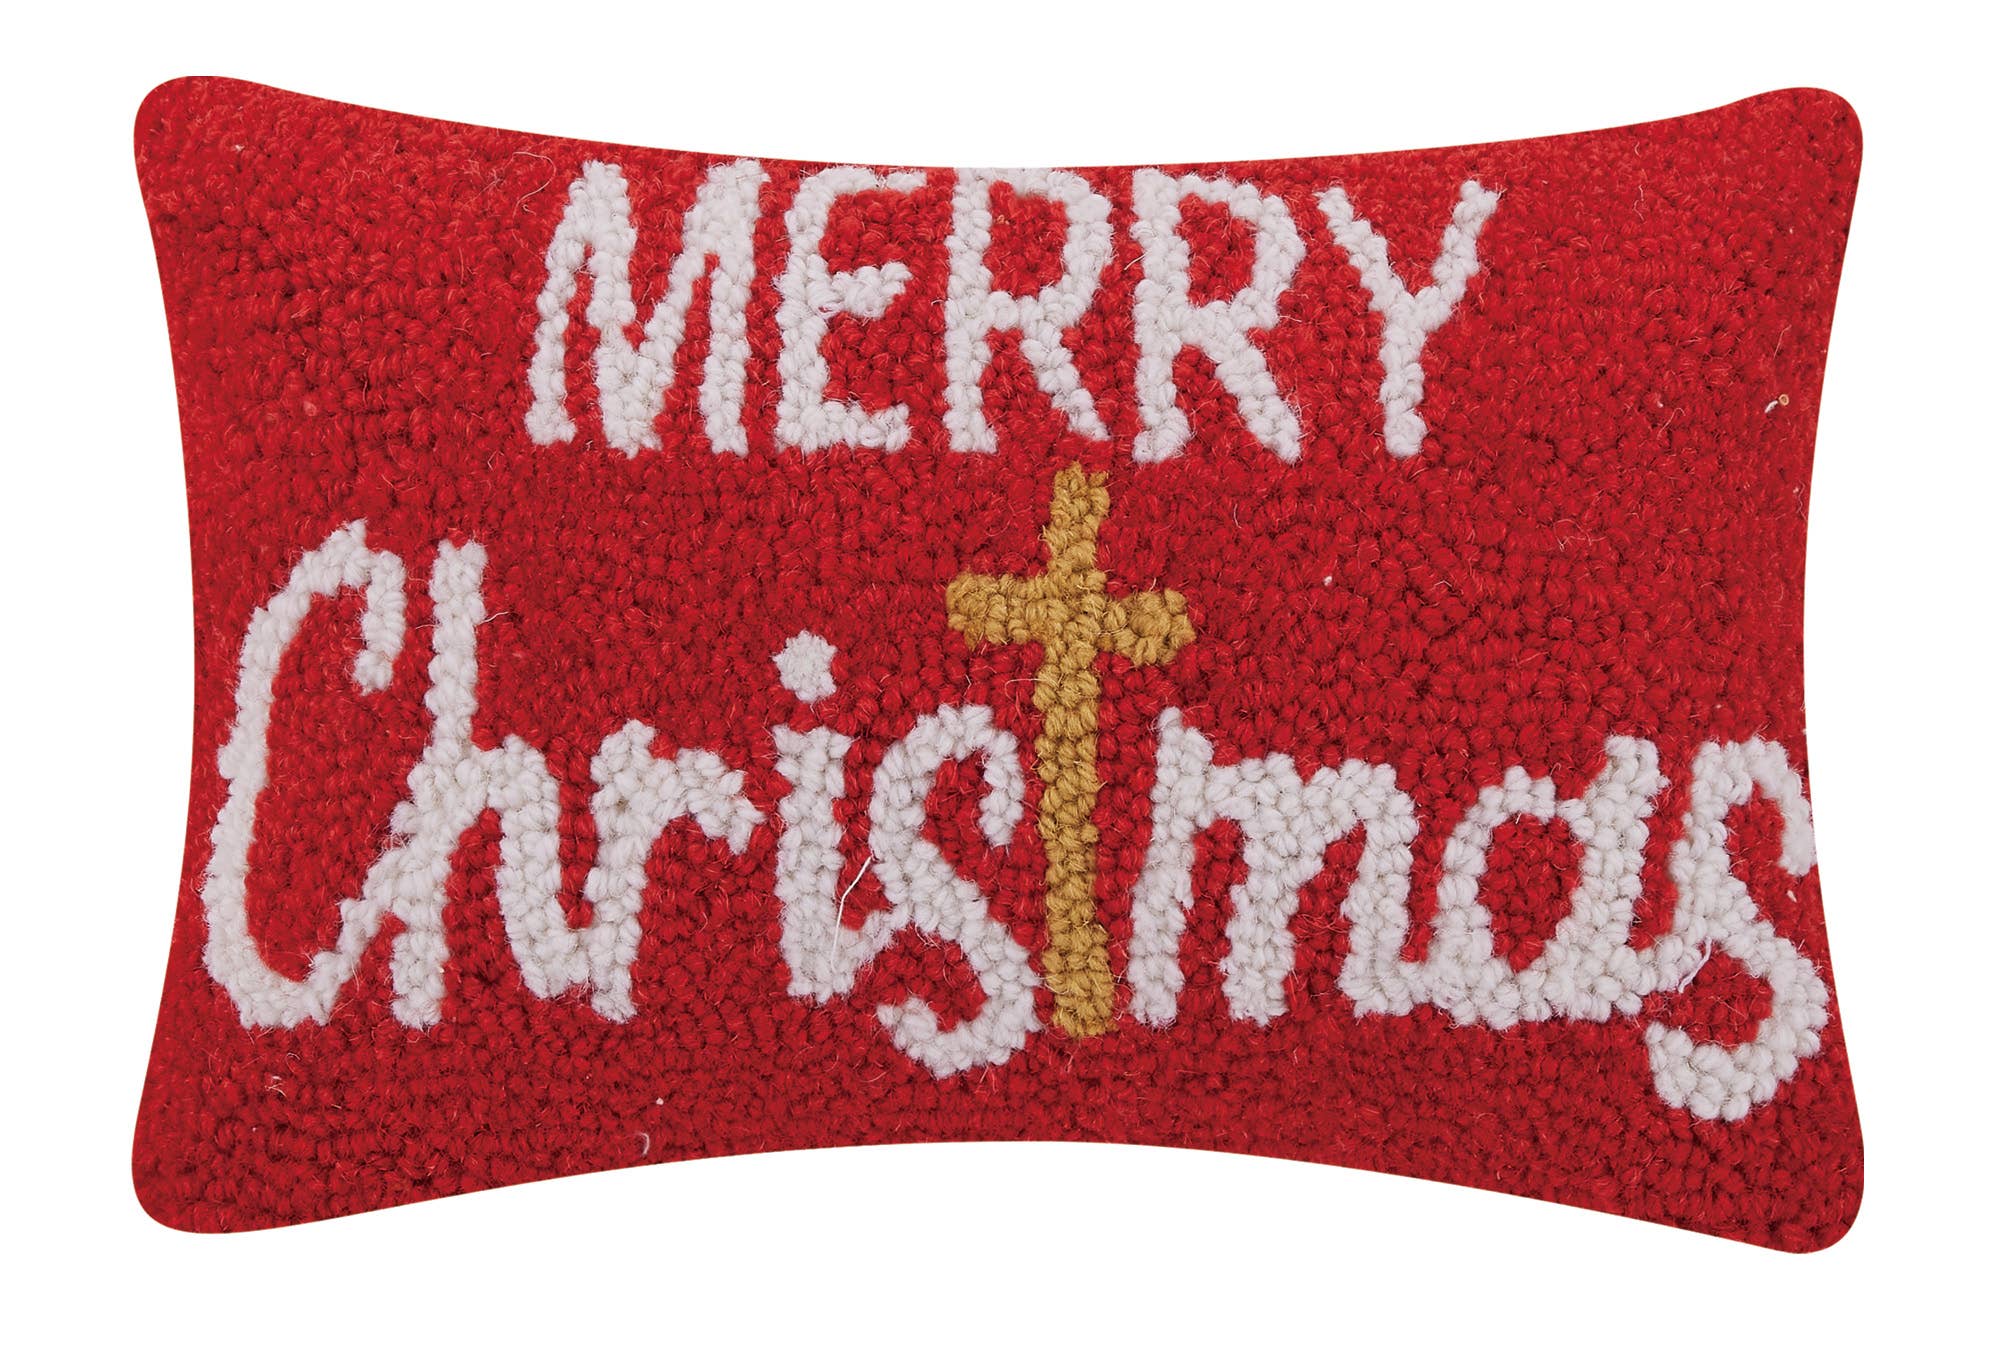 Merry Christmas With Cross Hook Pillow